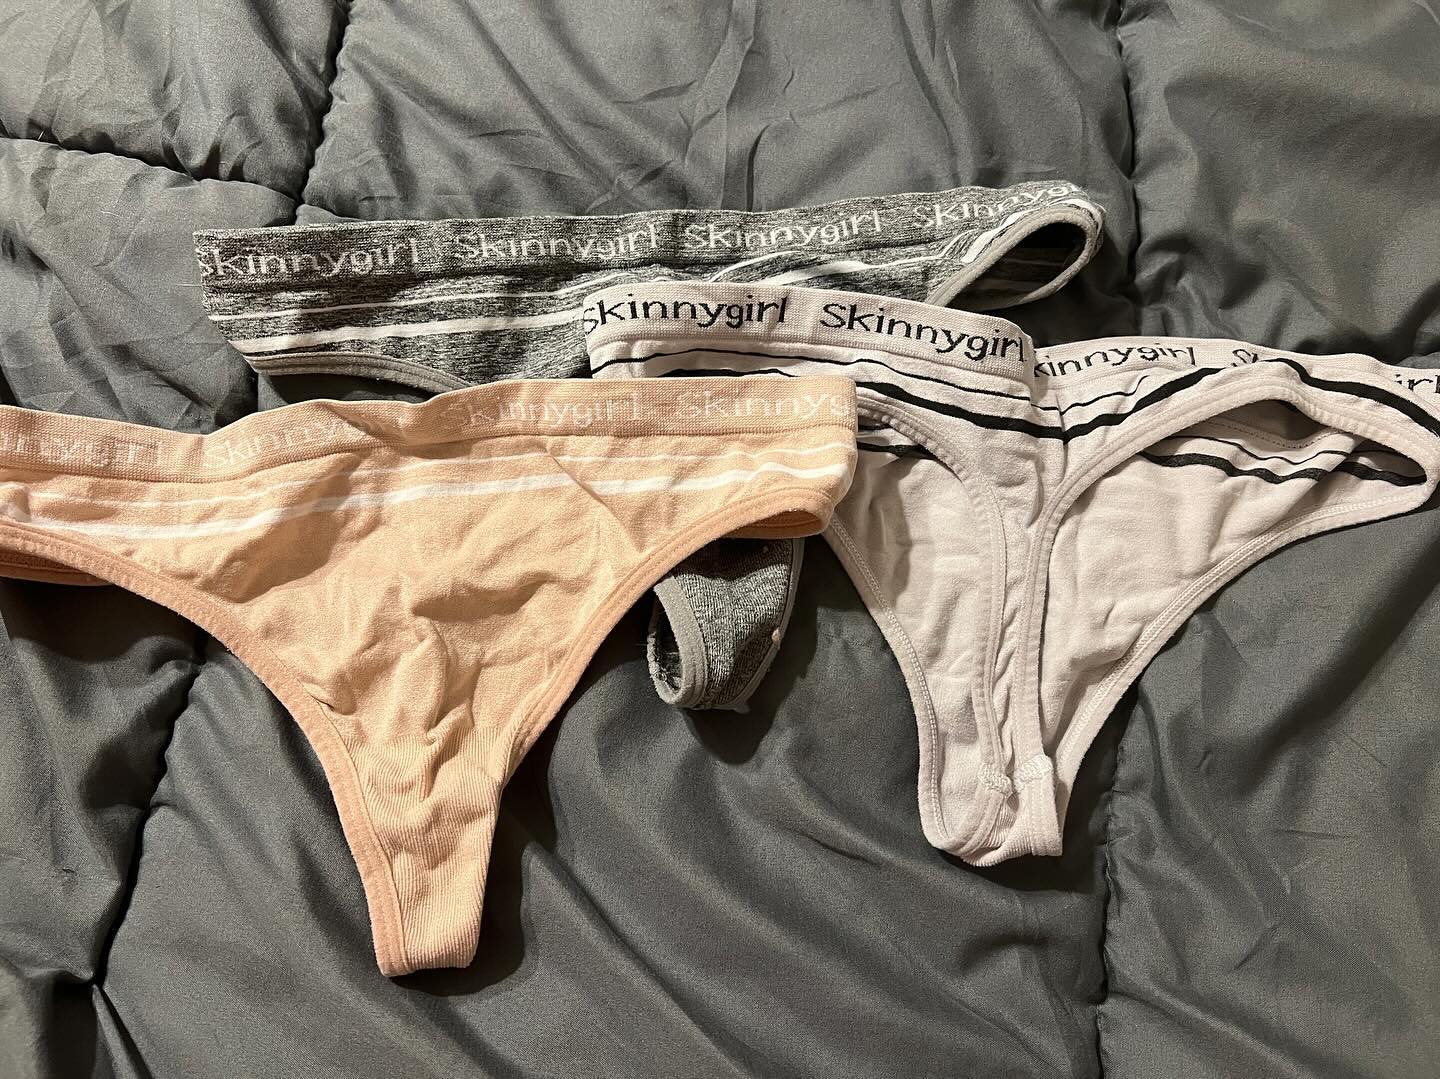 My new fun adventure😊. Selling some sexy panties for anyone interested. Thongs. Crotchless (for the ass lovers). Lacy and regular. Will wear them upon request for 1-2 days. Pictures for proof. Vacuum sealed and shipped. C@shapp $25. Buy 3 get 1 free. Let me know. Share with your friends😘